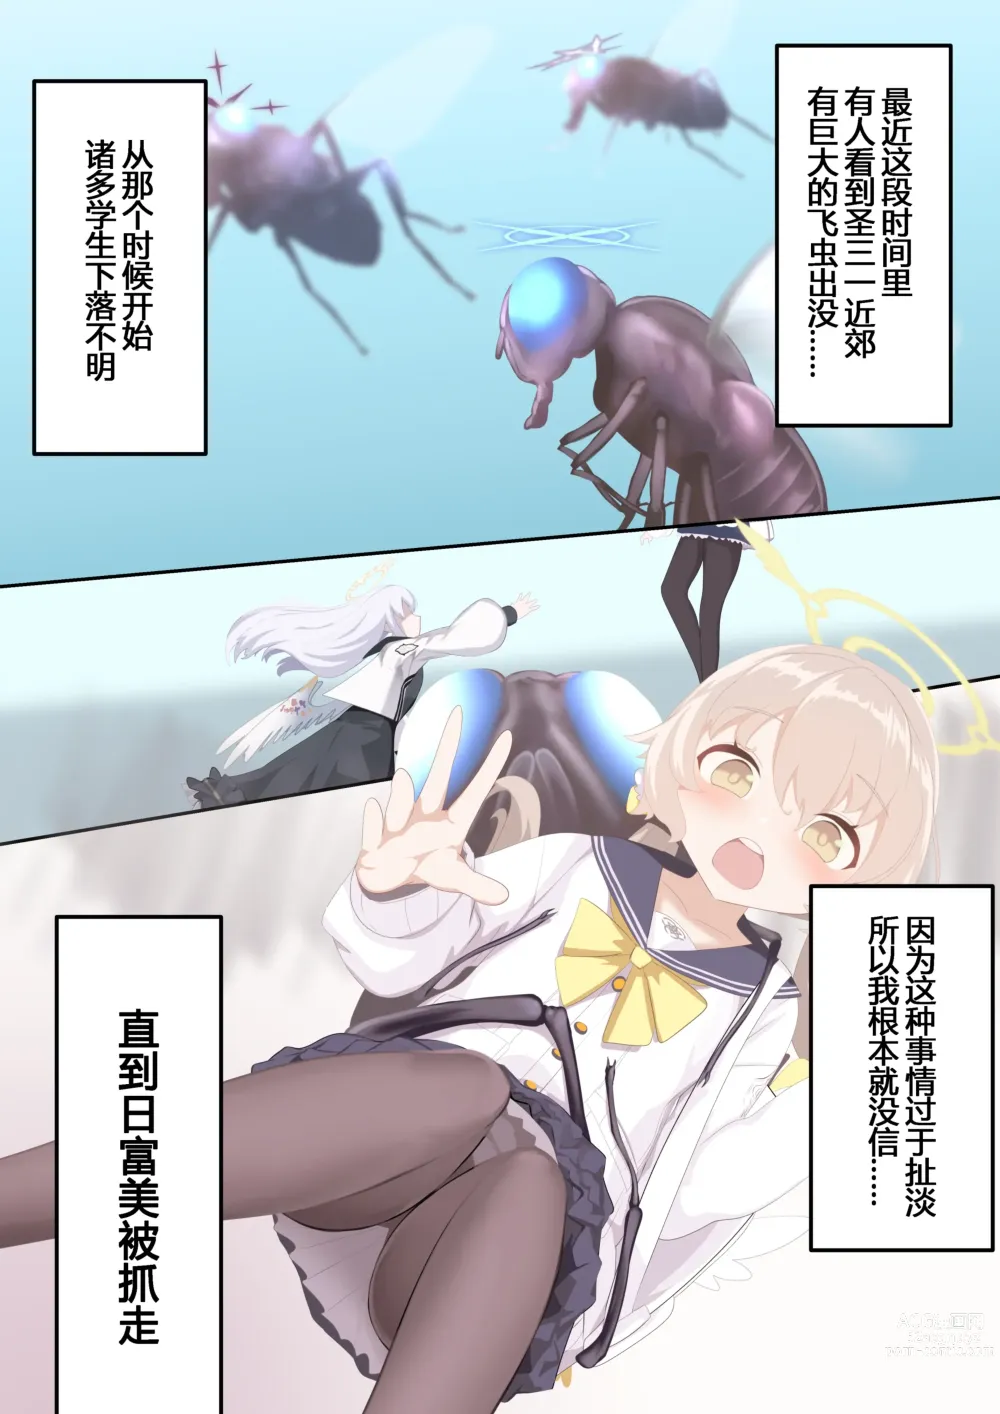 Page 3 of doujinshi 天翅光环